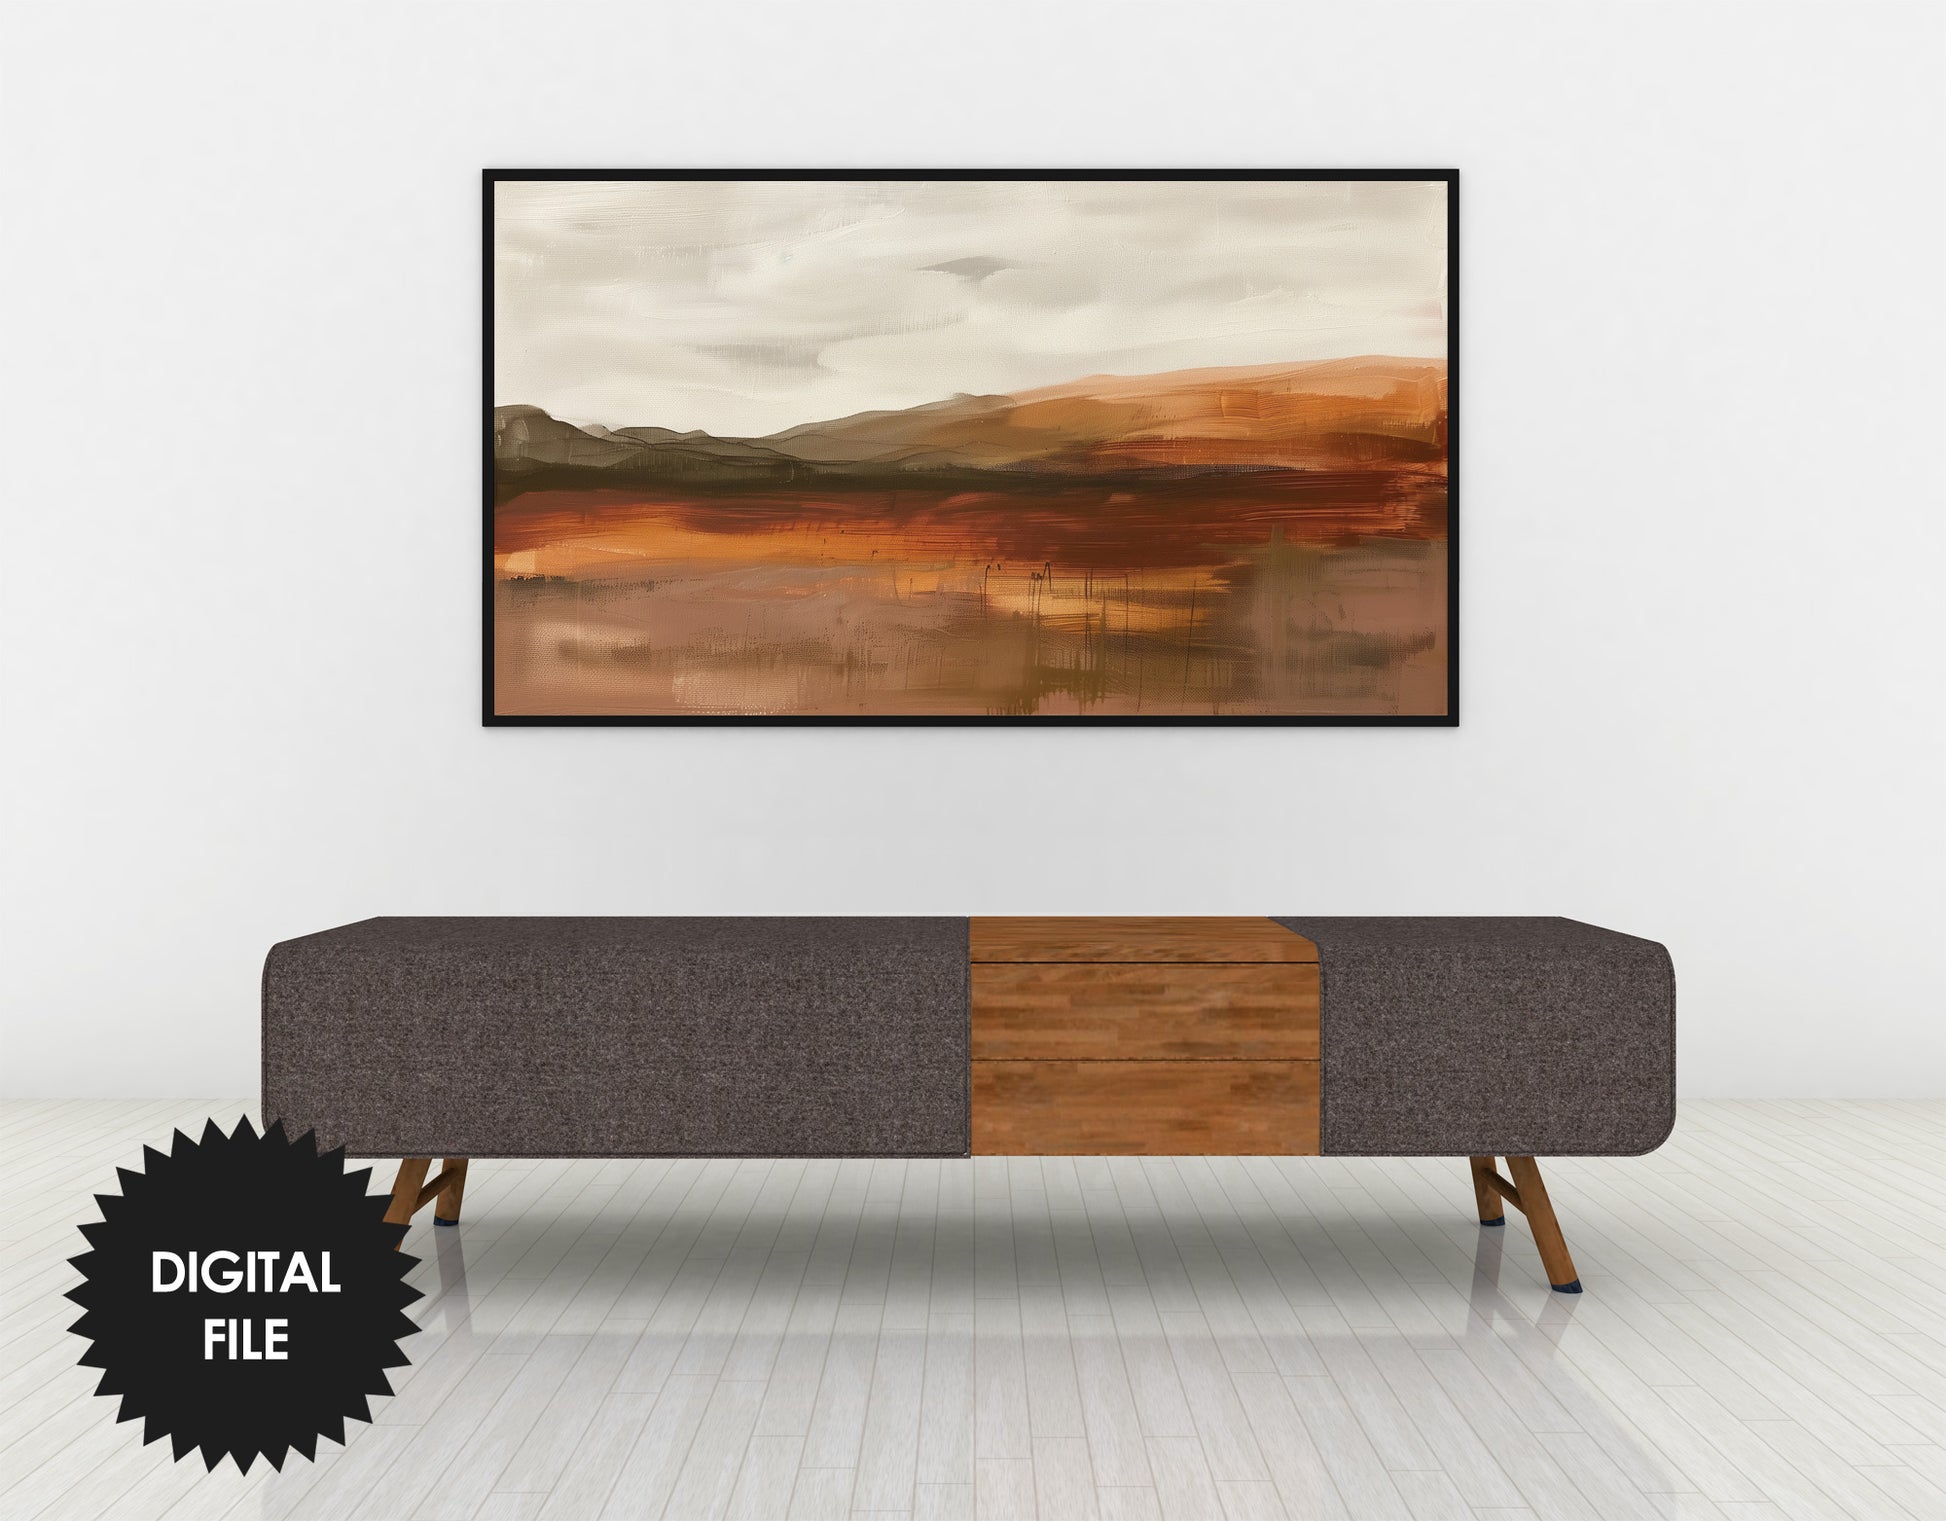 Abstract Earth Tones Landscape Frame TV Art  closer view